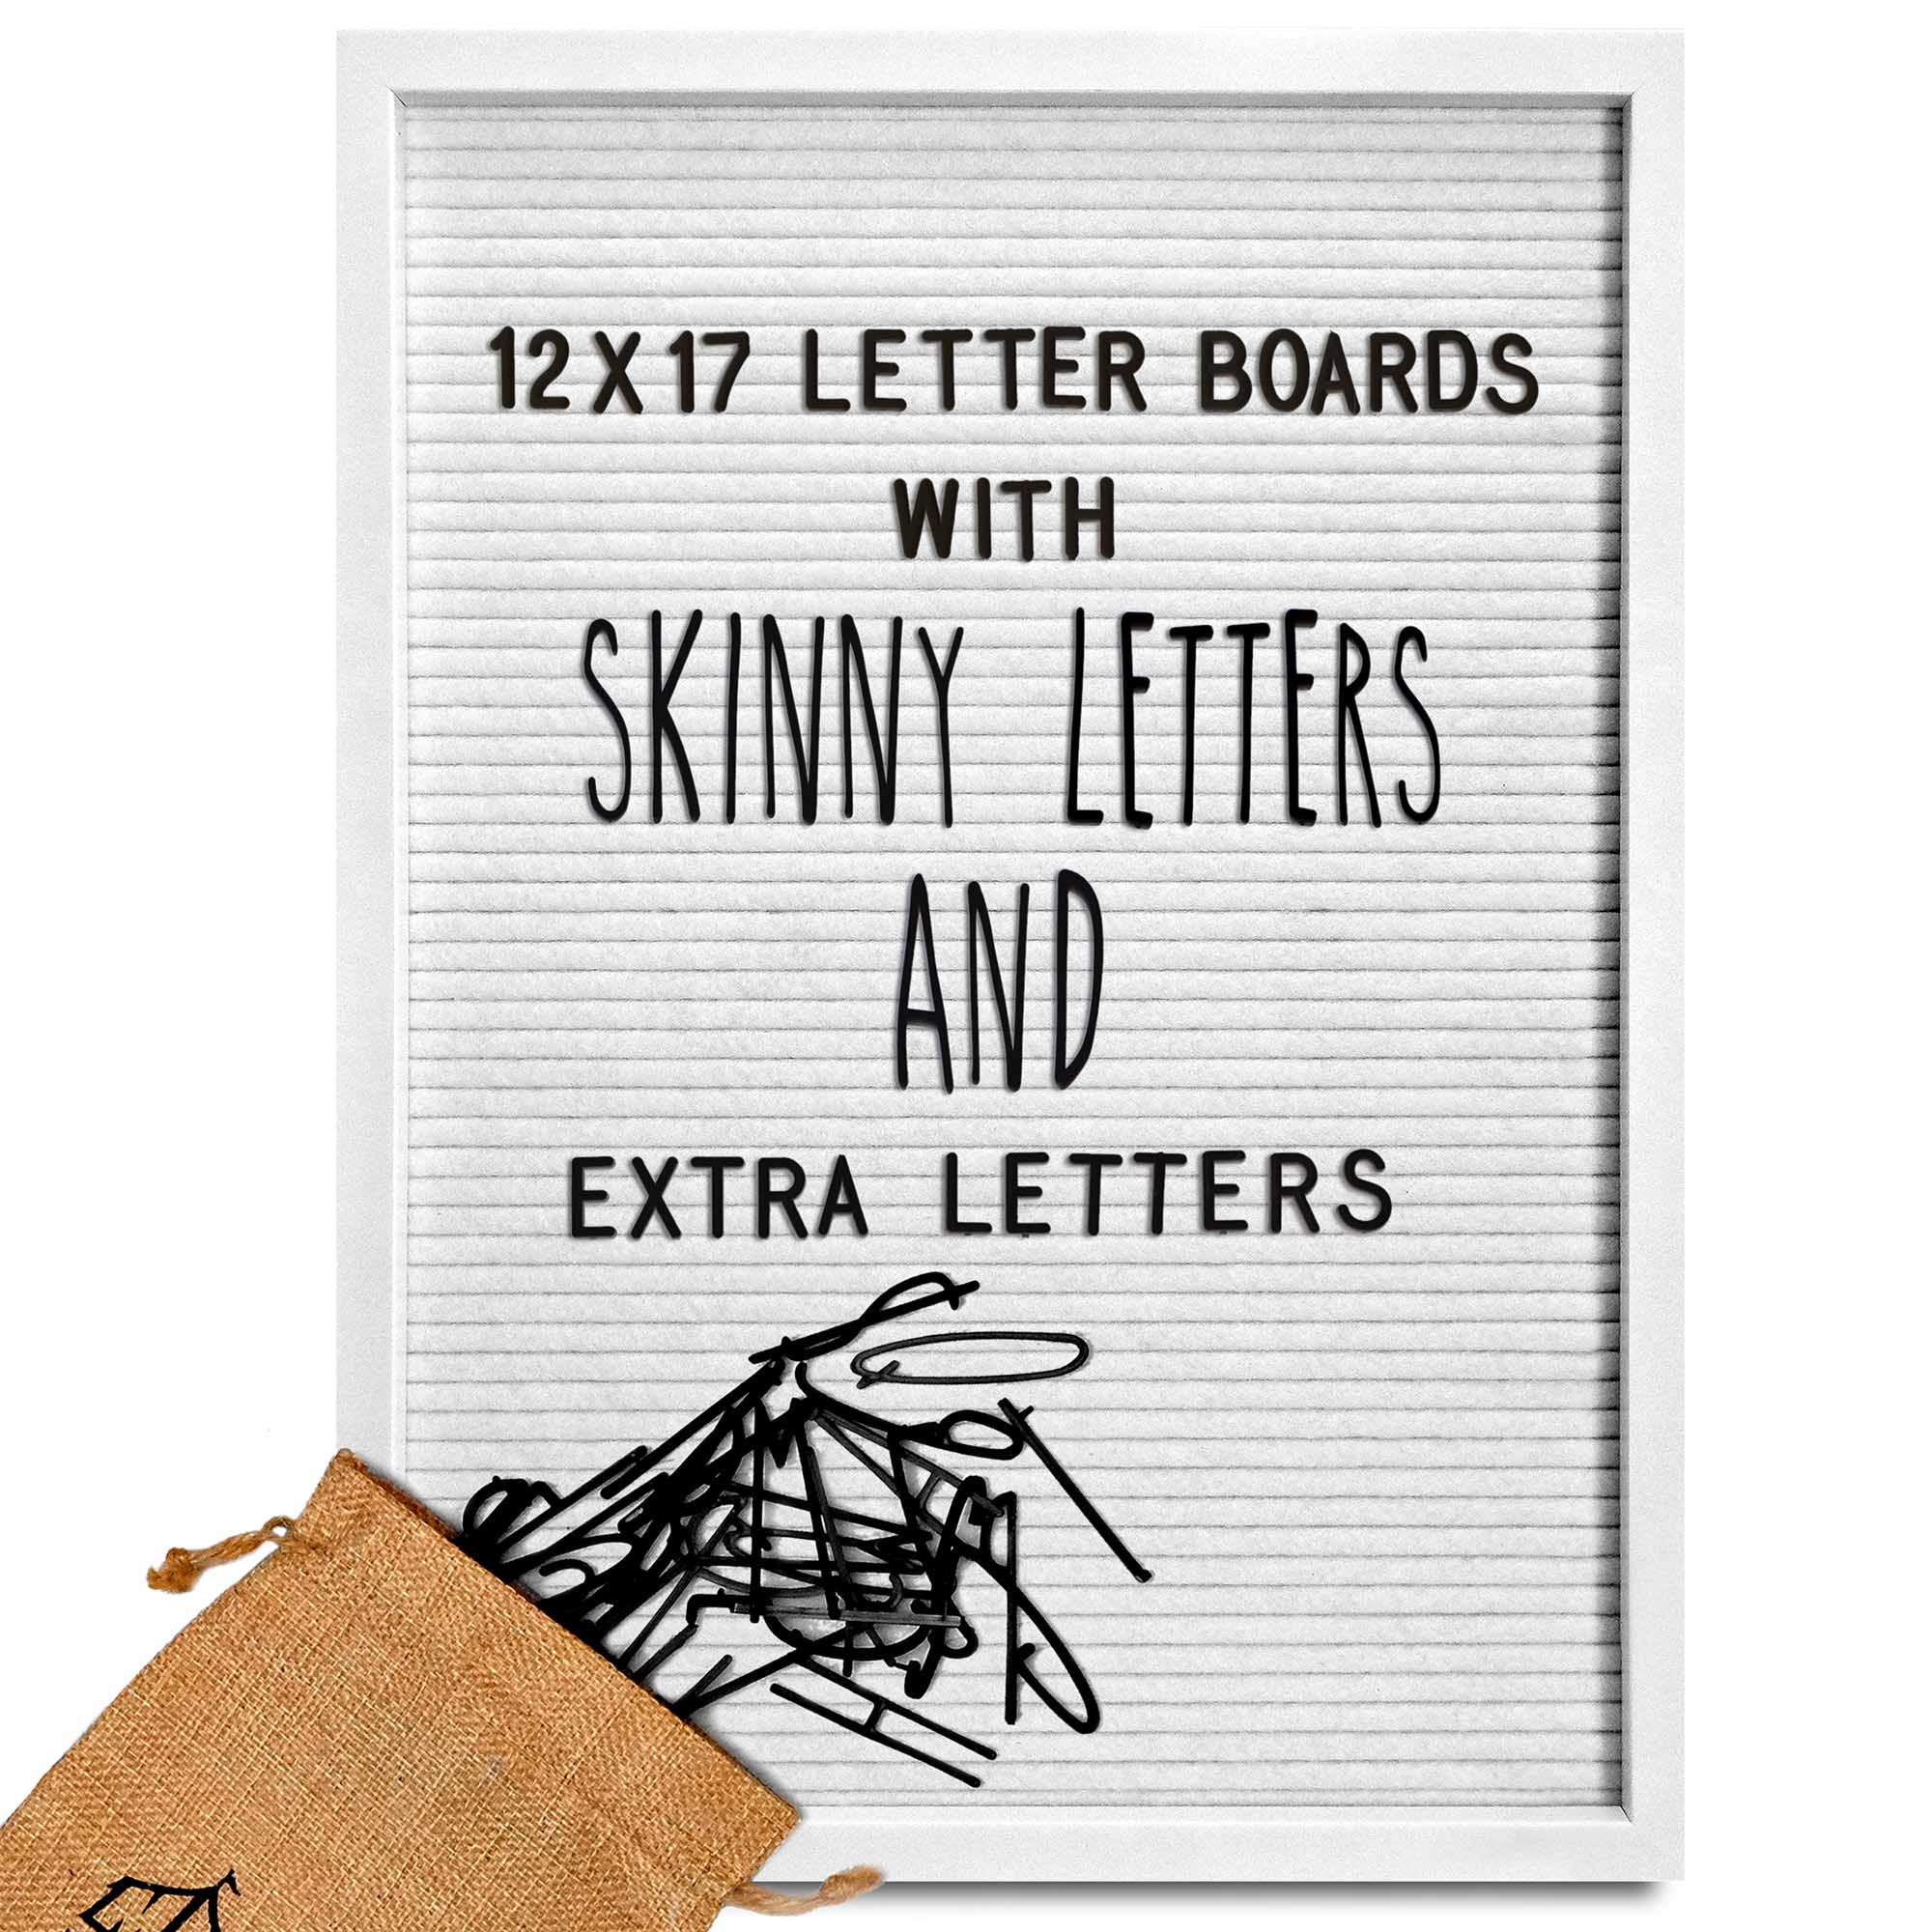 MAINEVENT Letter Board Sign Skinny Felt Board Letters 12x17, Felt Letter Board Baby Announcement Boards Letters, Changeable Letter Boards